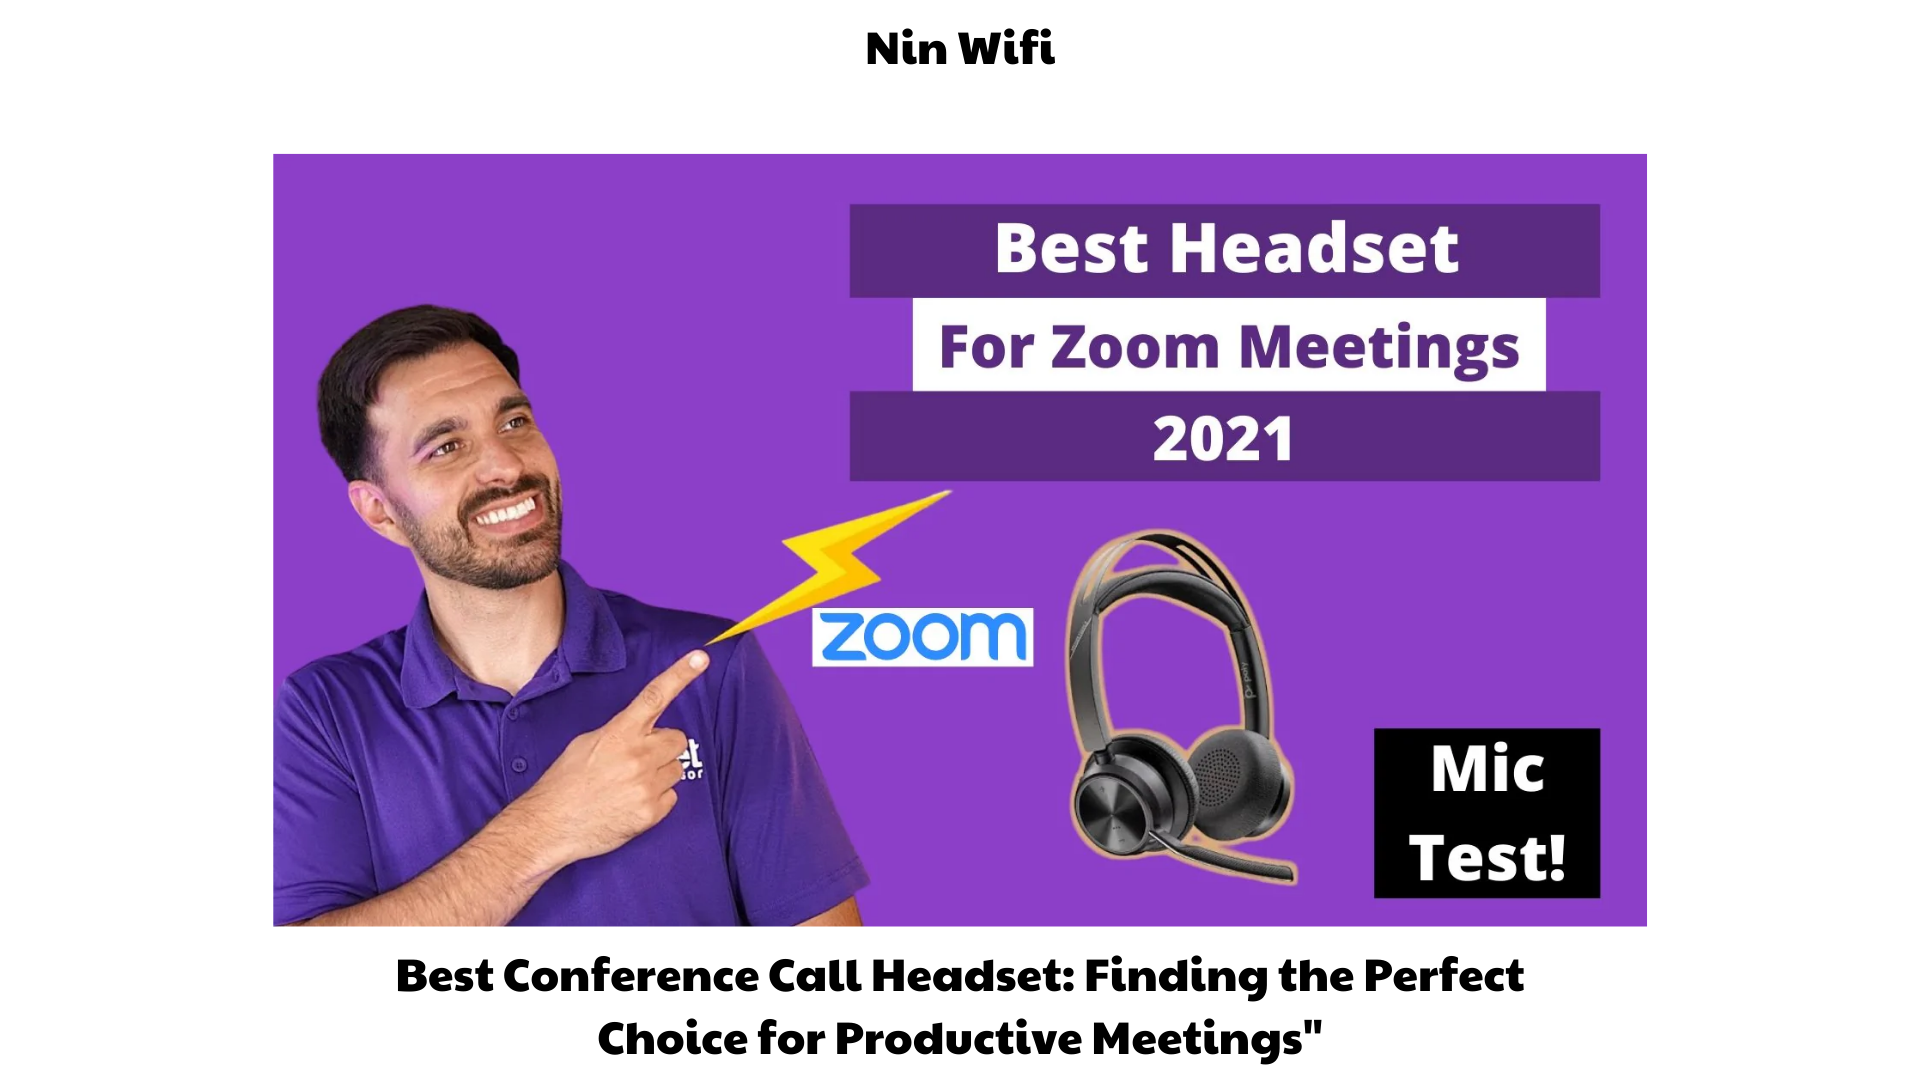 Best Conference Call Headset Finding the Perfect Choice for Productive Meetings